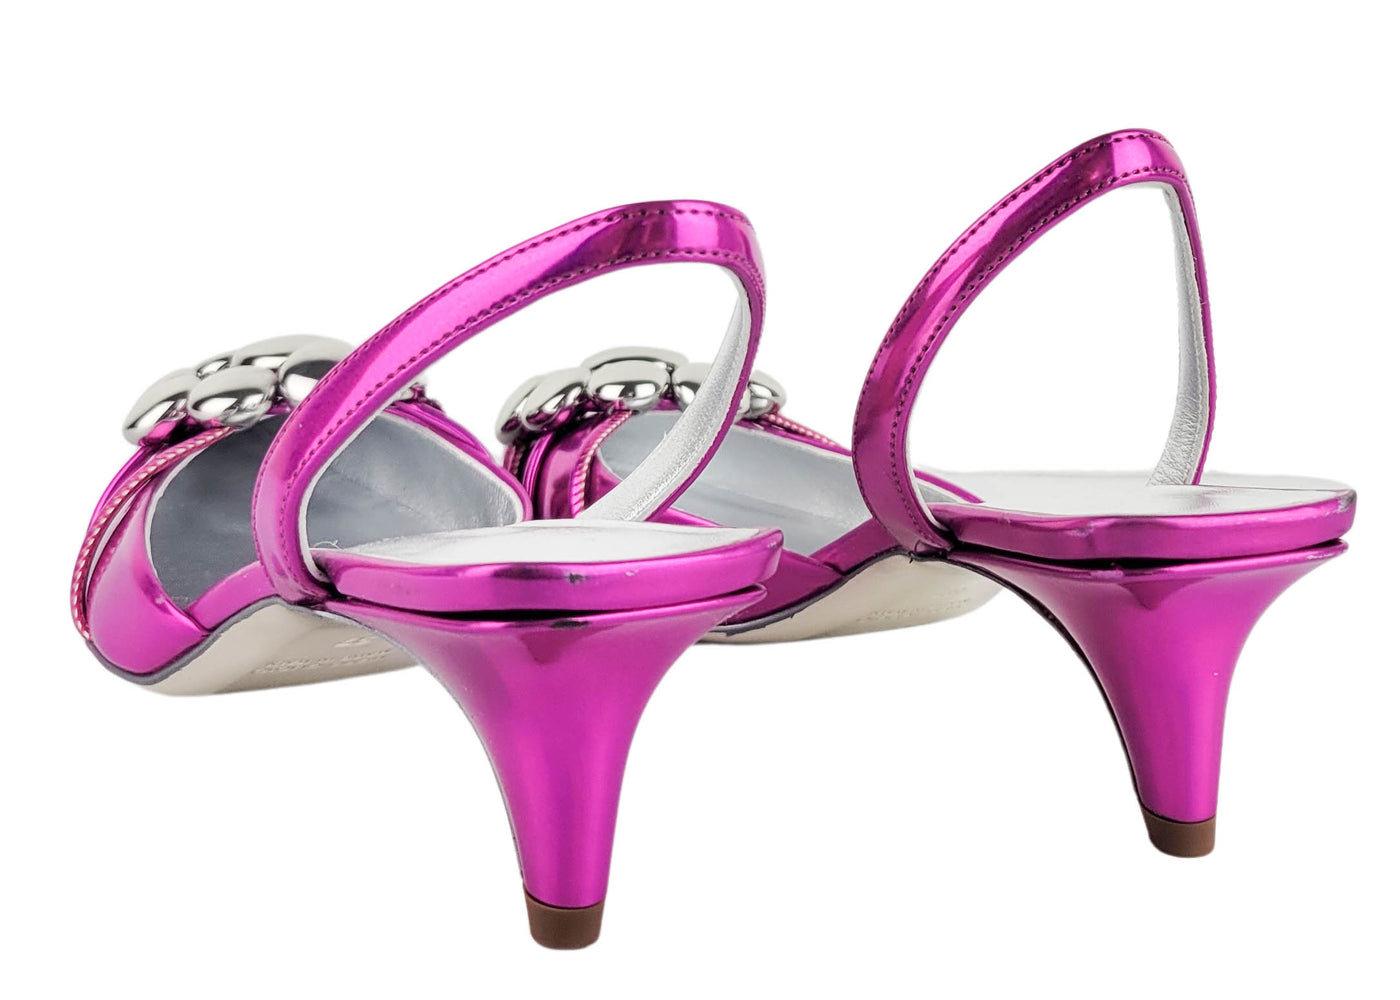 Bruno Frisoni Comete Slingbacks in Hot Pink and Silver - Discounts on Bruno Frisoni at UAL